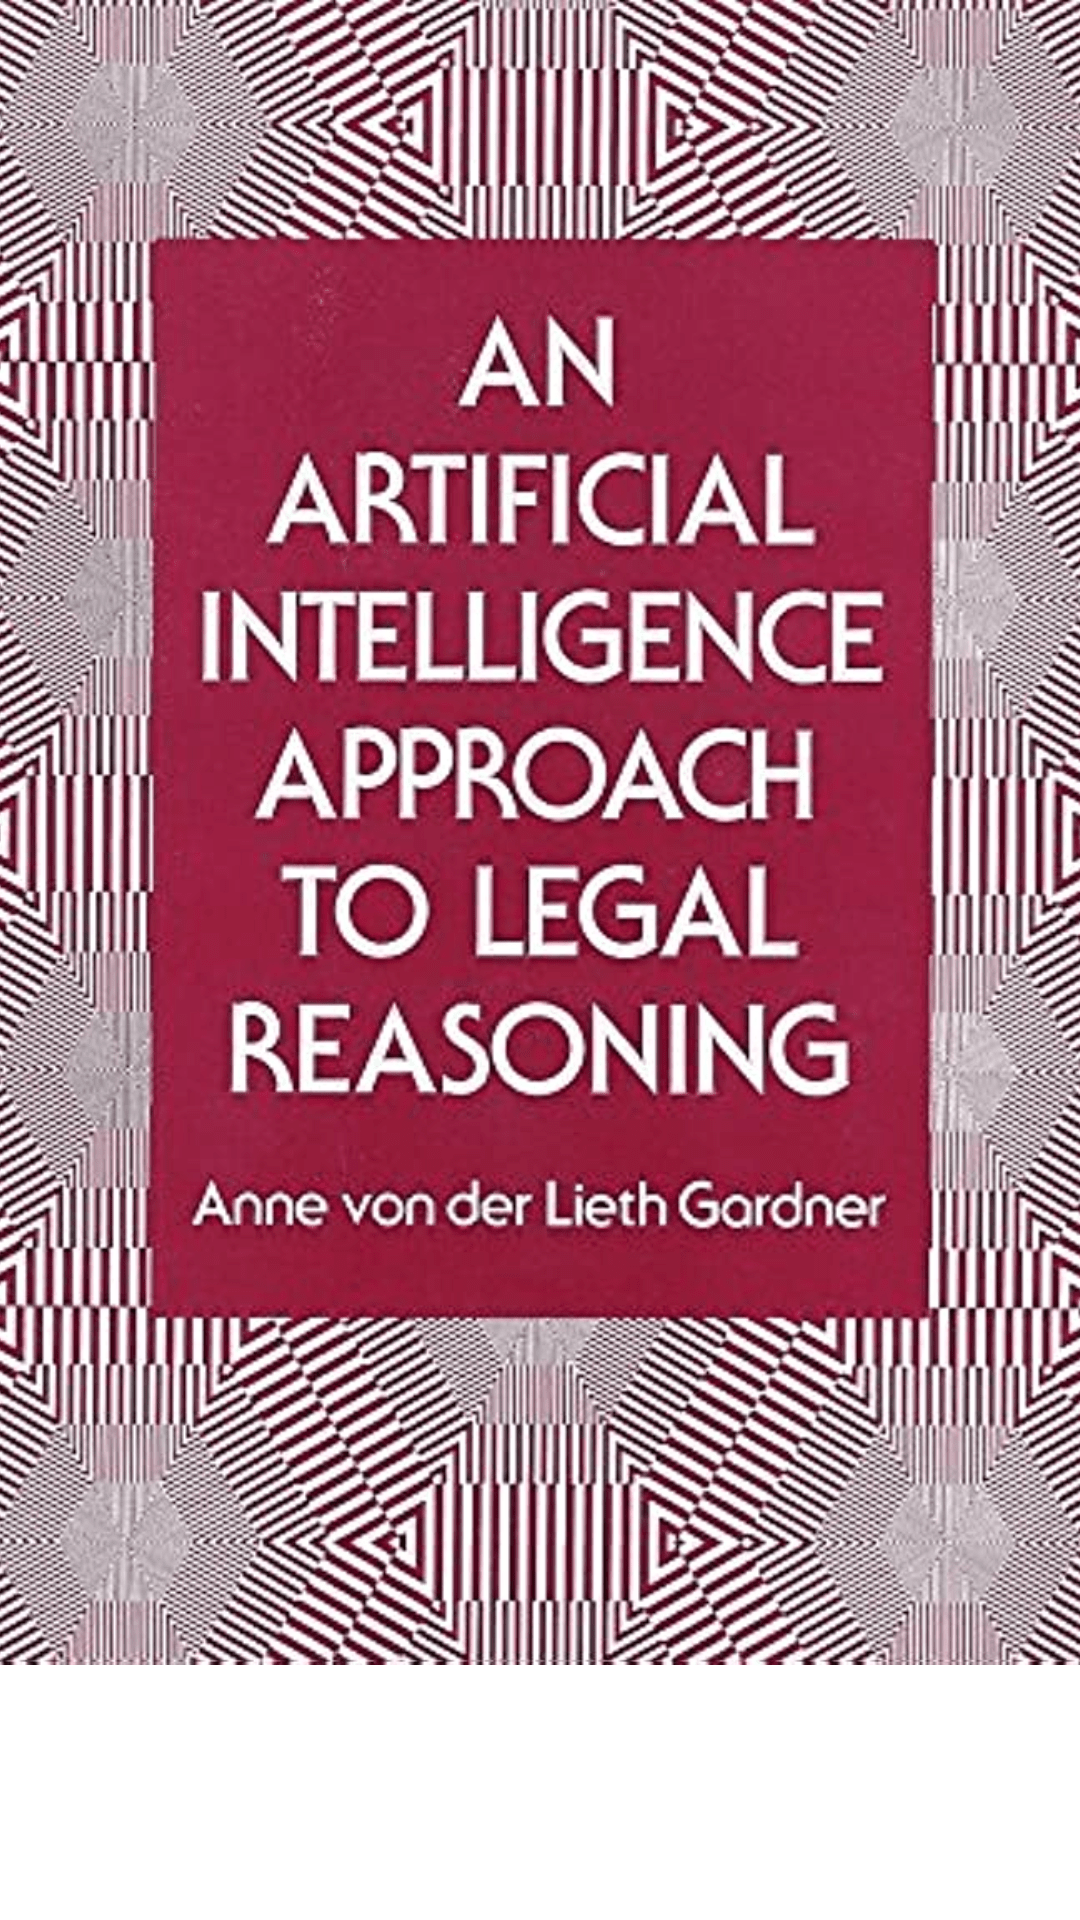 An Artificial Intelligence Approach to Legal Reasoning